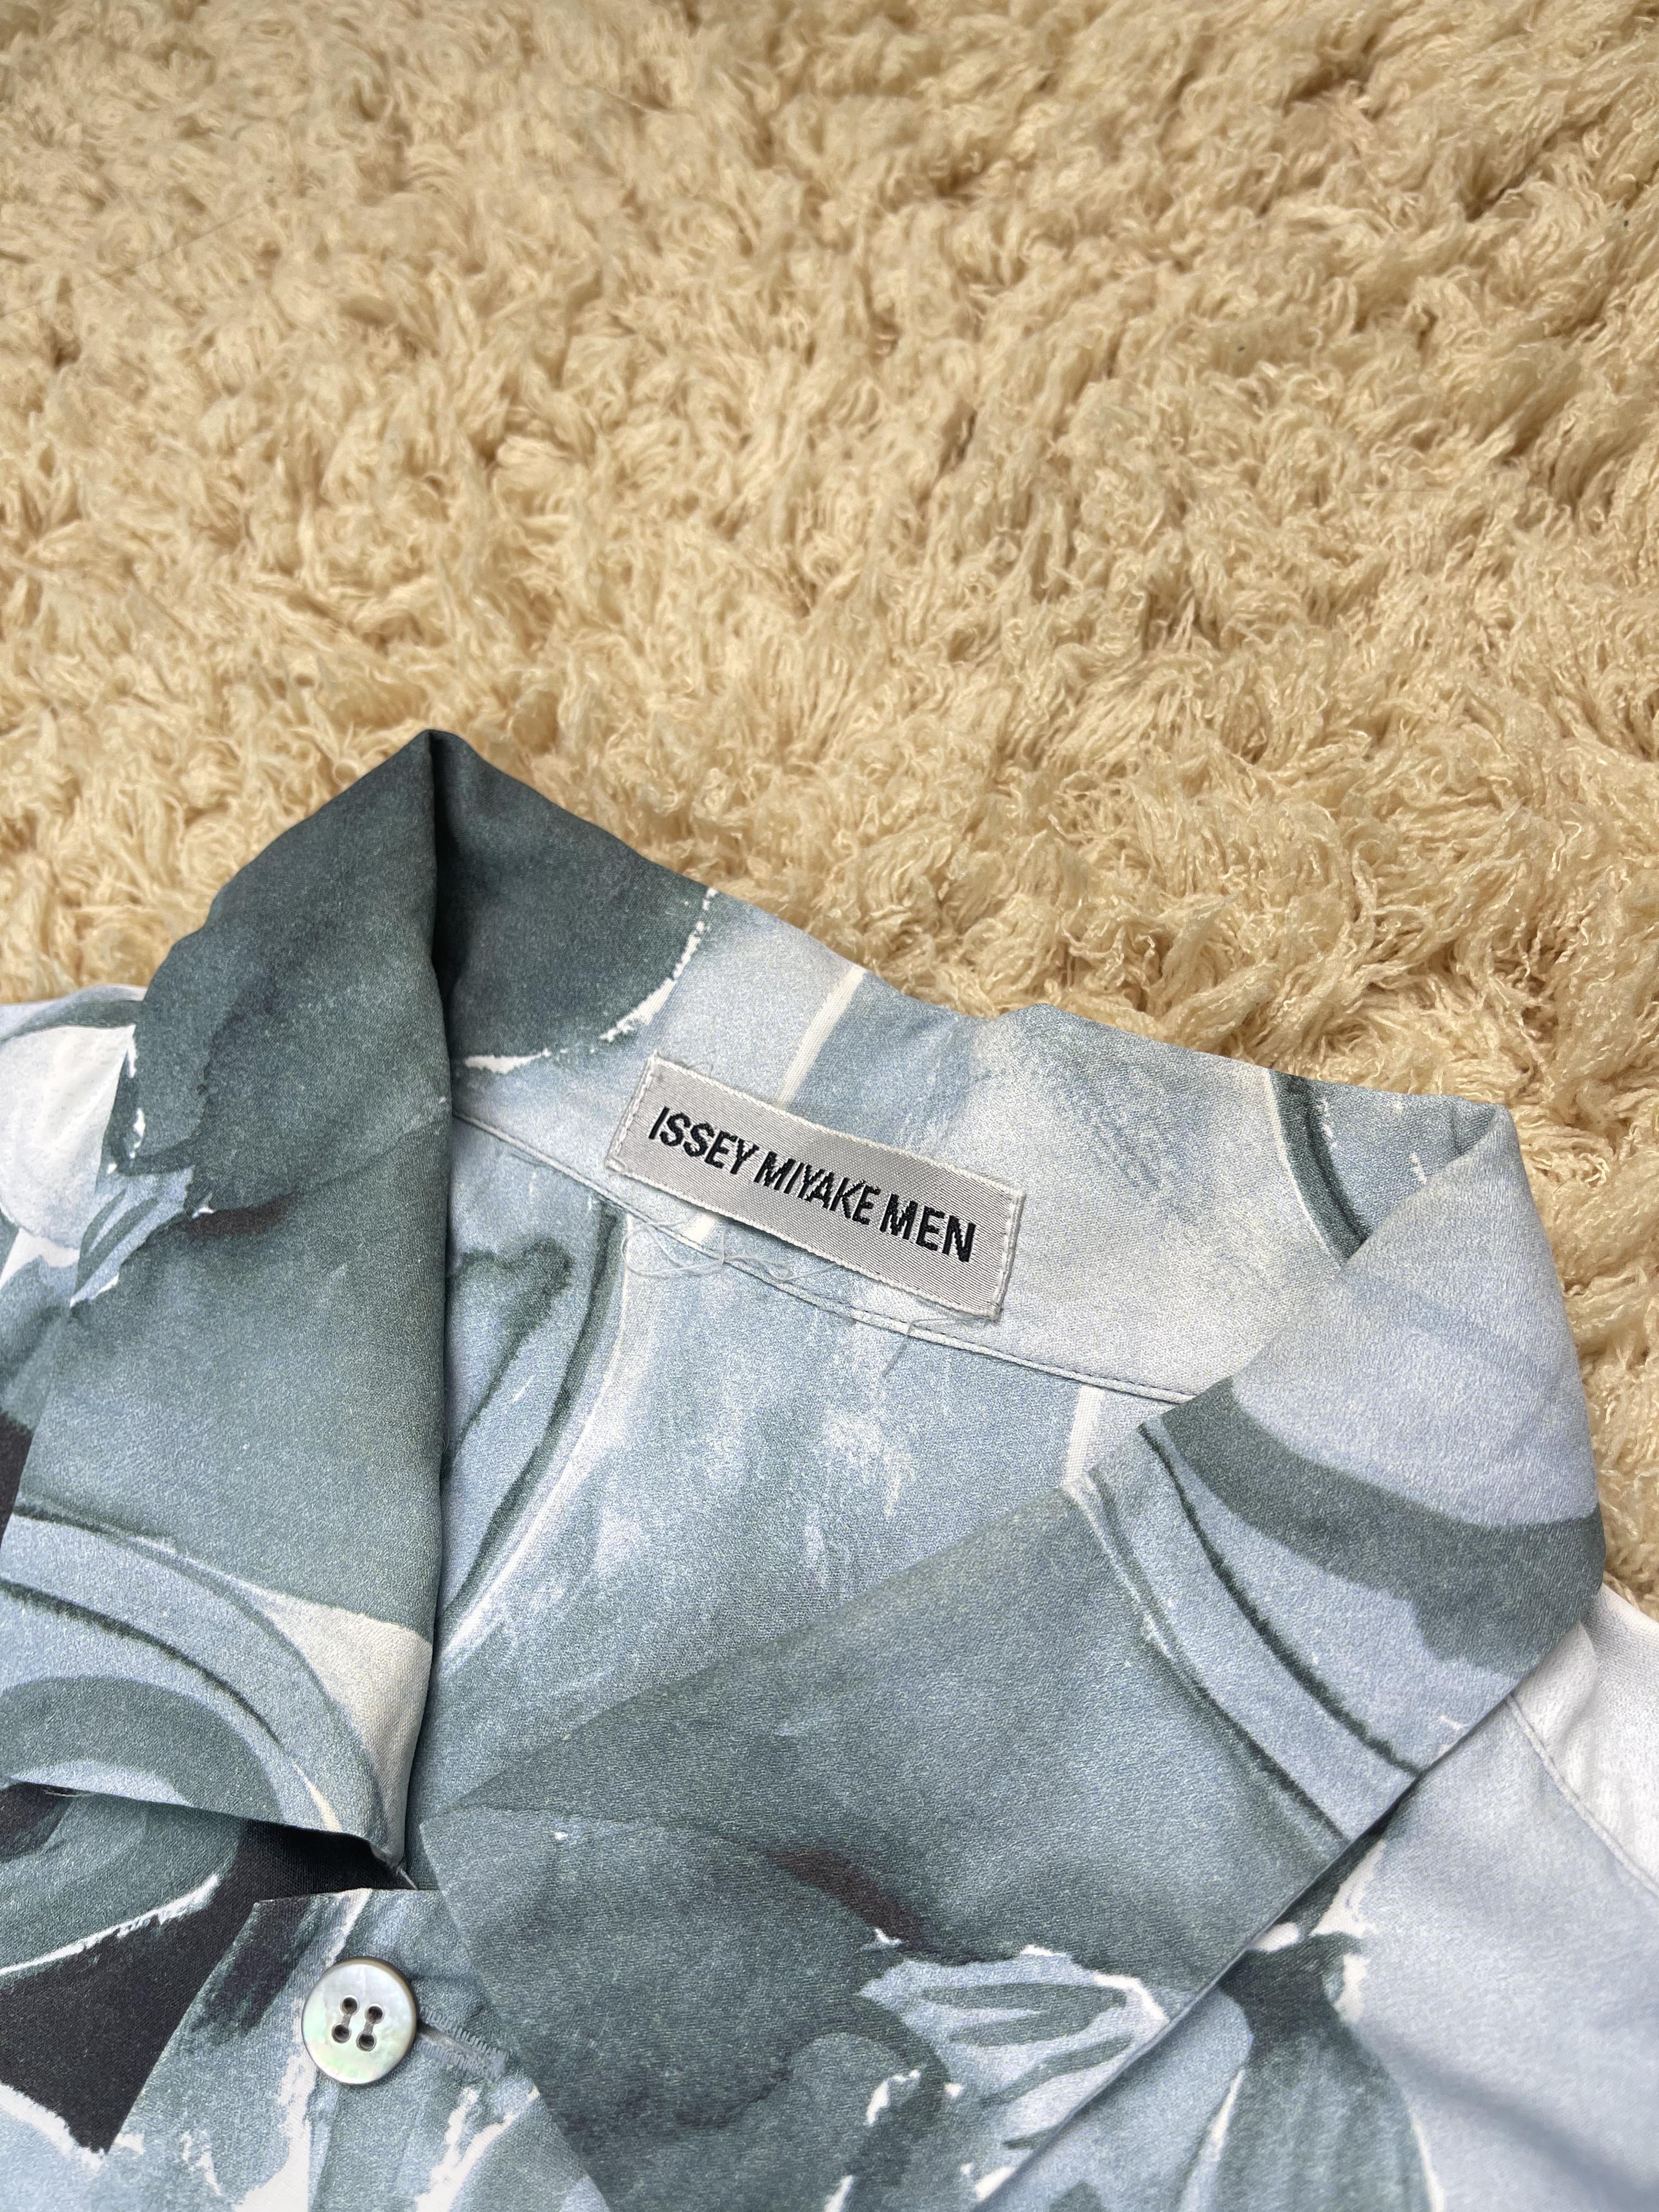 Issey Miyake S/S1997 Lily Water Flower Shirt In Good Condition For Sale In Tương Mai Ward, Hoang Mai District